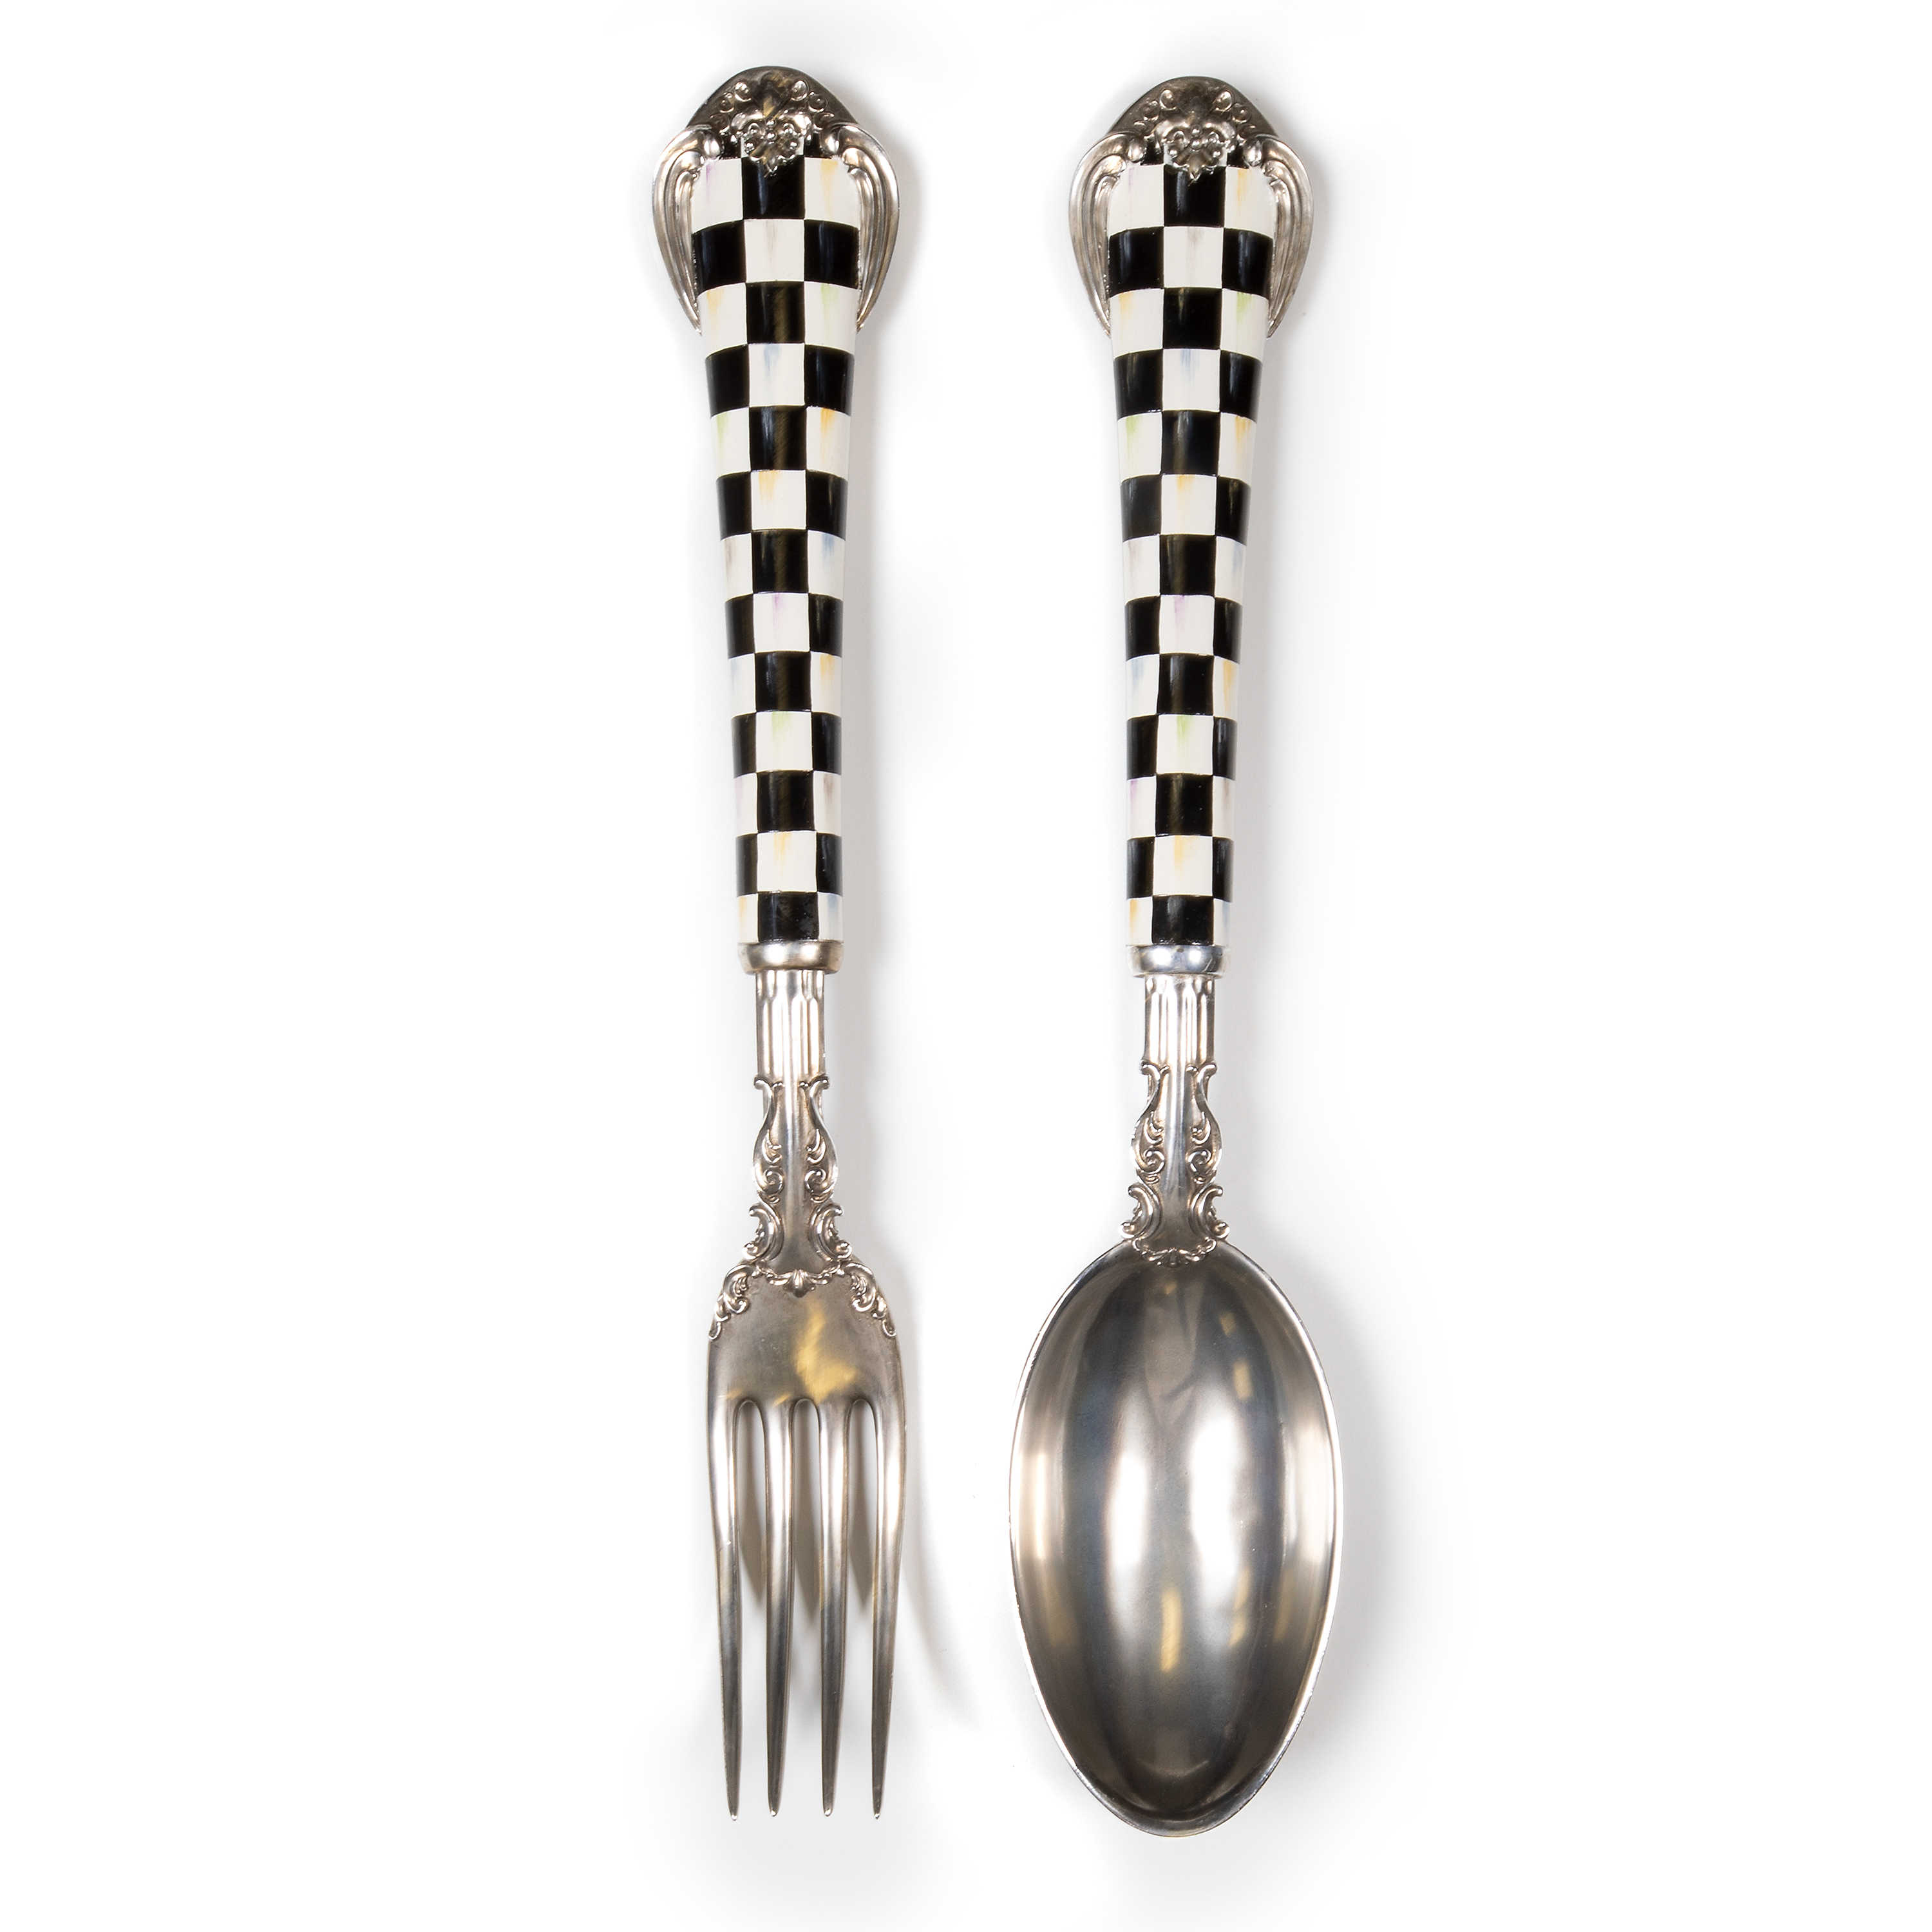 Courtly Check Spoon & Fork mackenzie-childs Panama 0